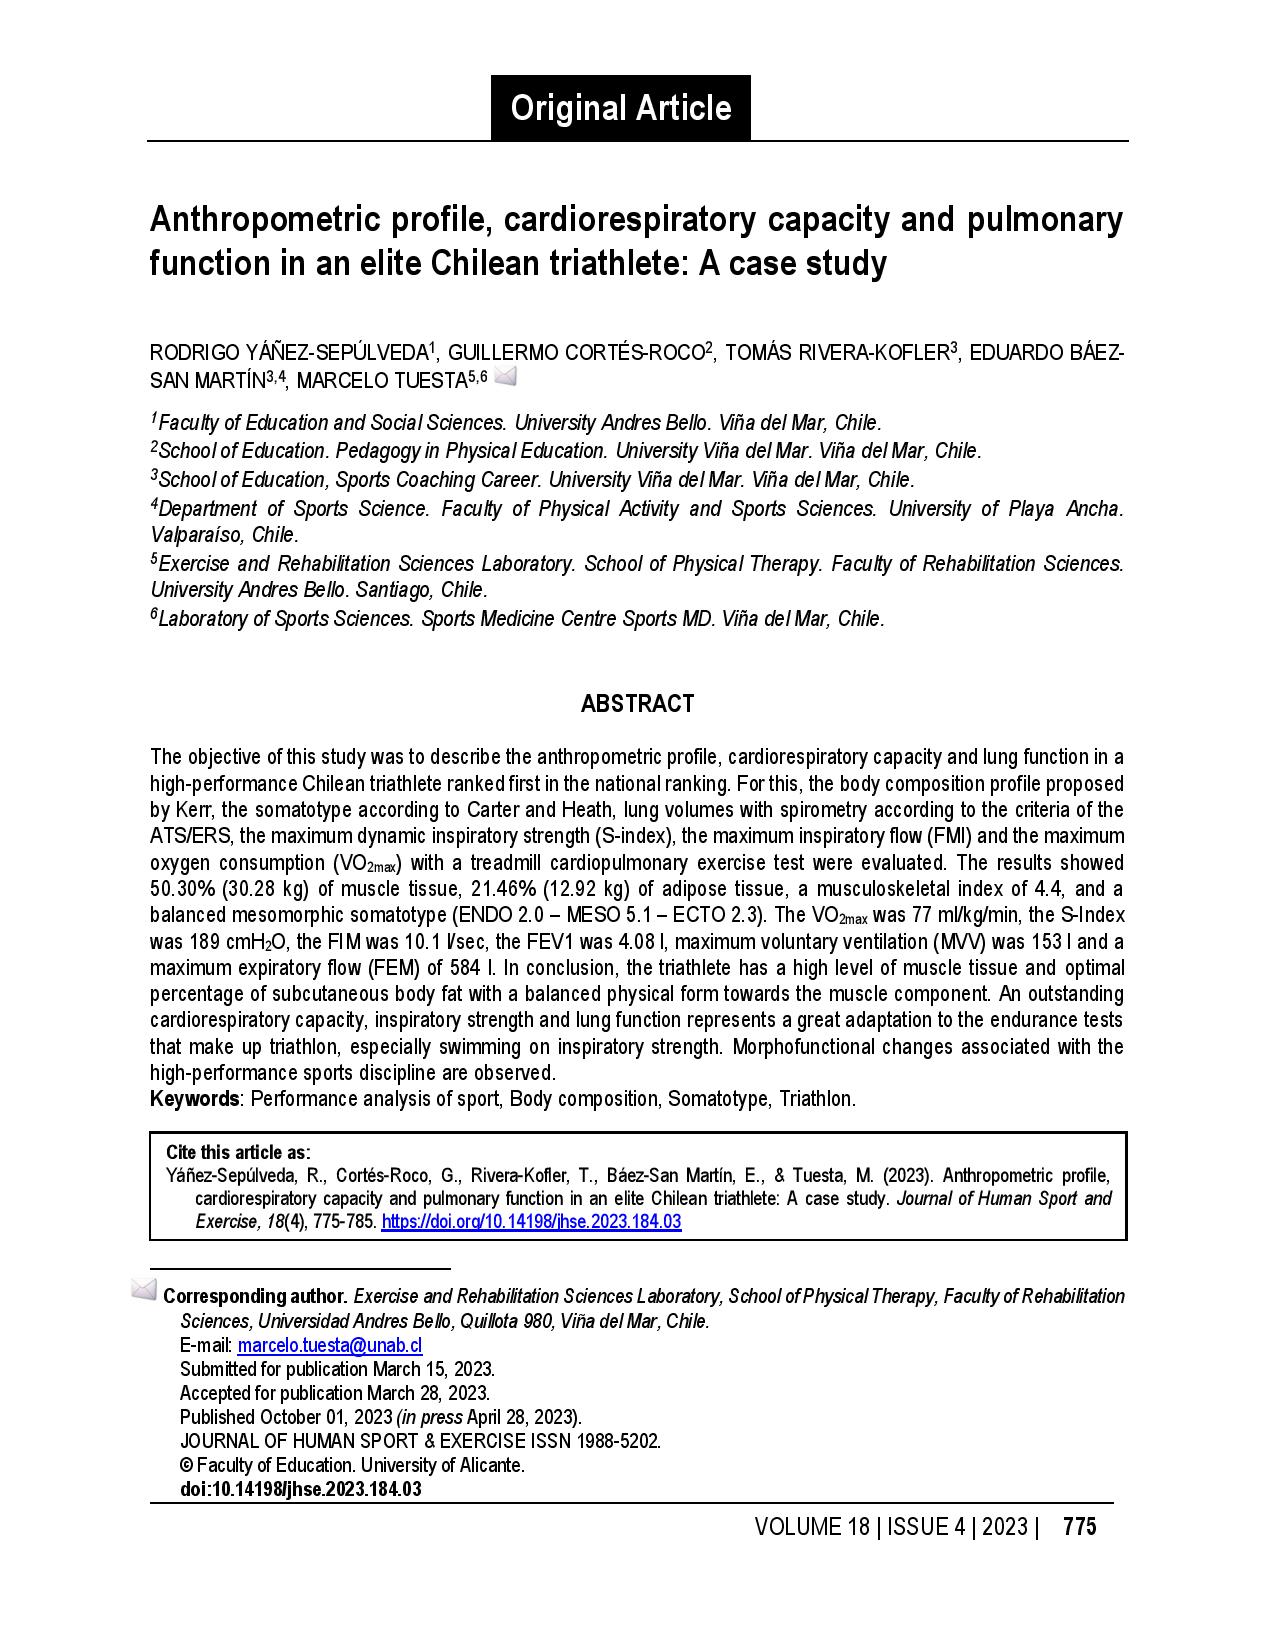 Anthropometric profile, cardiorespiratory capacity and pulmonary function in an elite Chilean triathlete: A case study